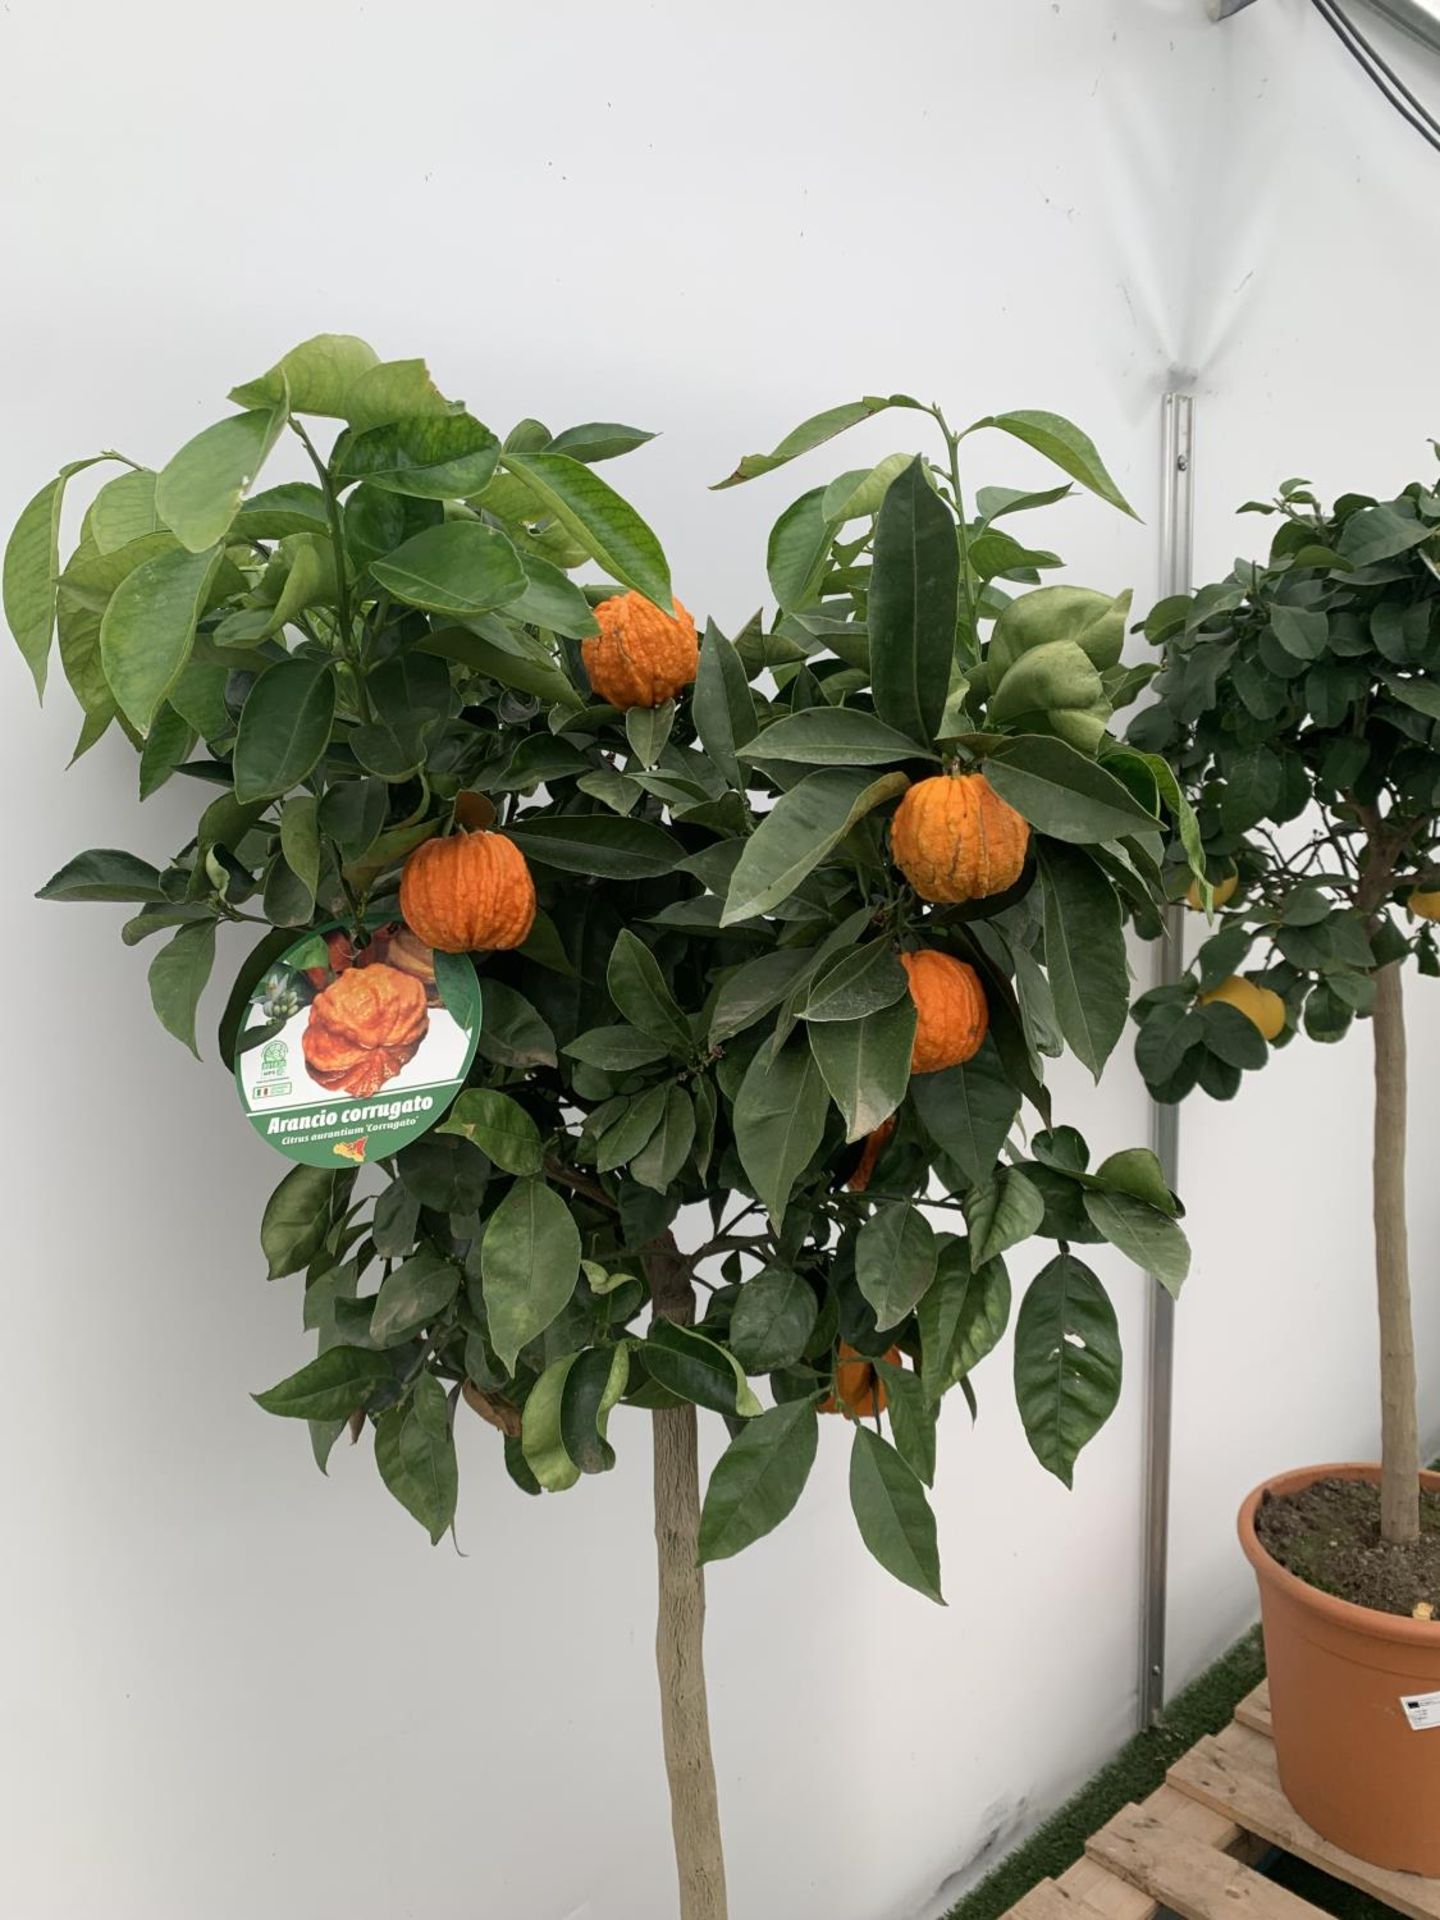 ONE ARANCIO CORRUGATO RARE CITRUS ORANGE FRUIT TREE WITH FRUIT APPROX 150CM IN HEIGHT IN A 25LTR POT - Image 5 of 9